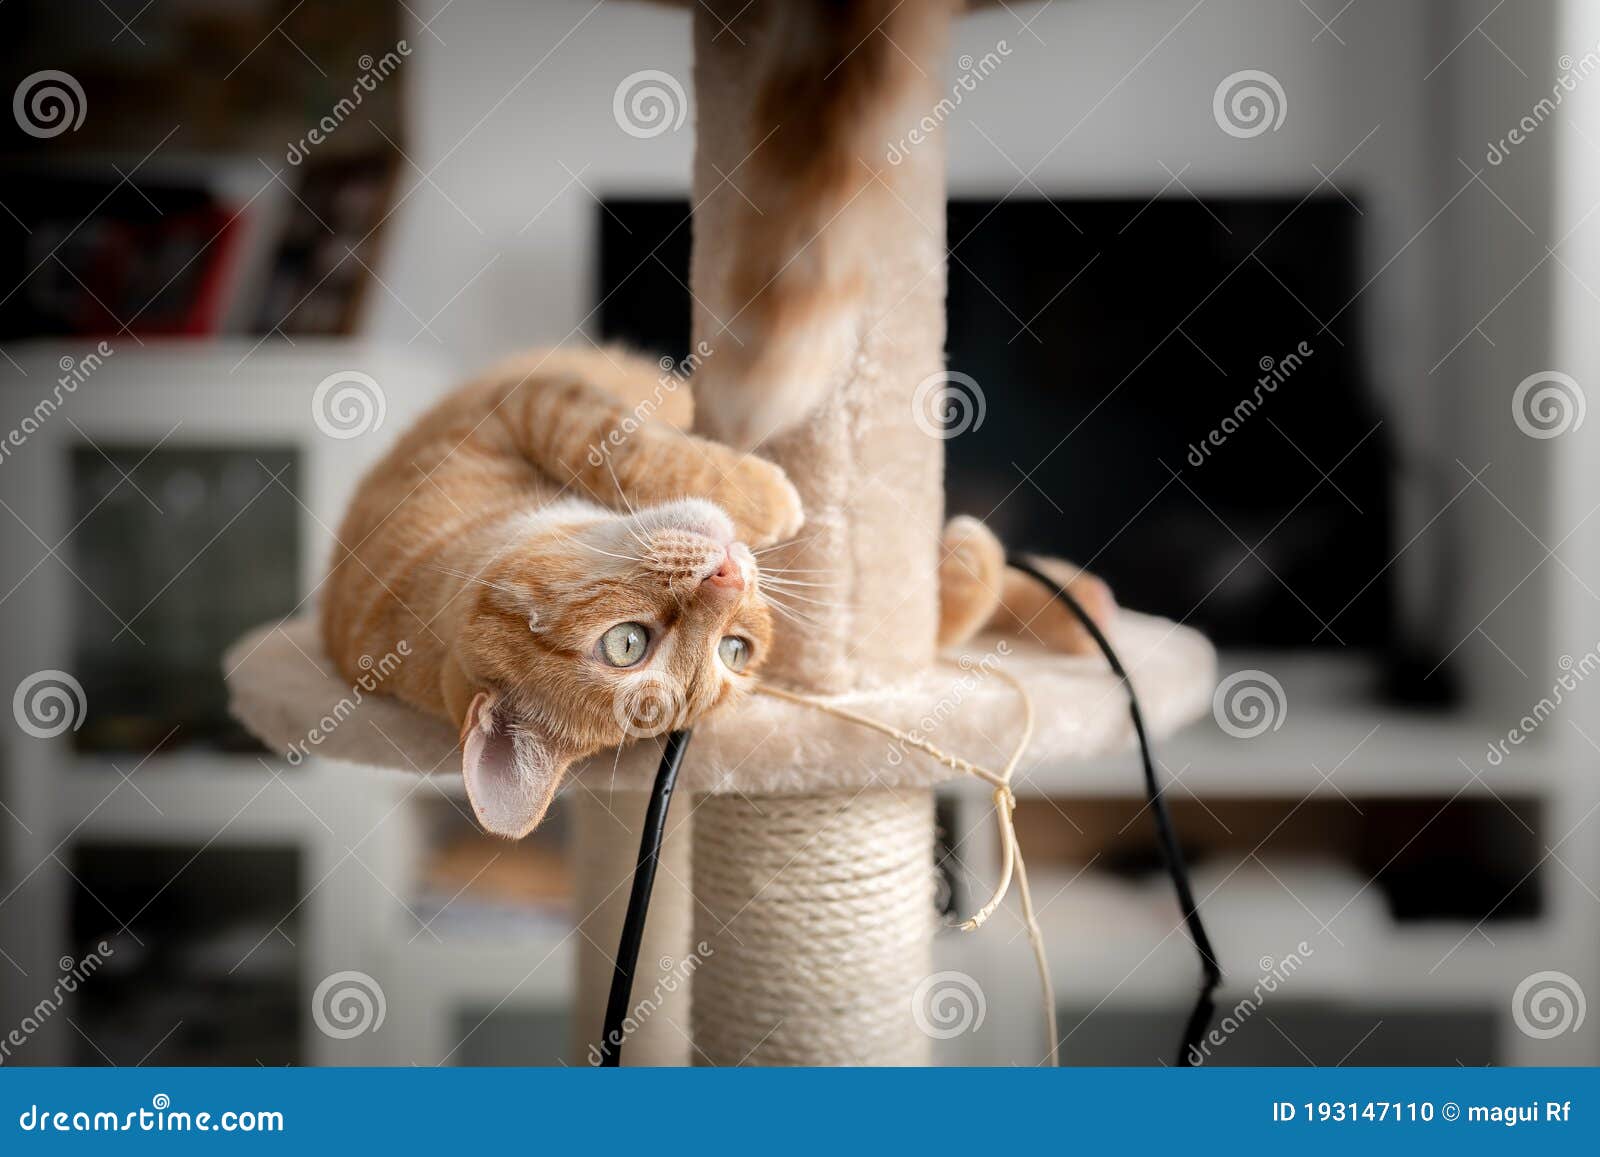 brown tabby cat with green eyes lying on a scratching tower plays with a hairball